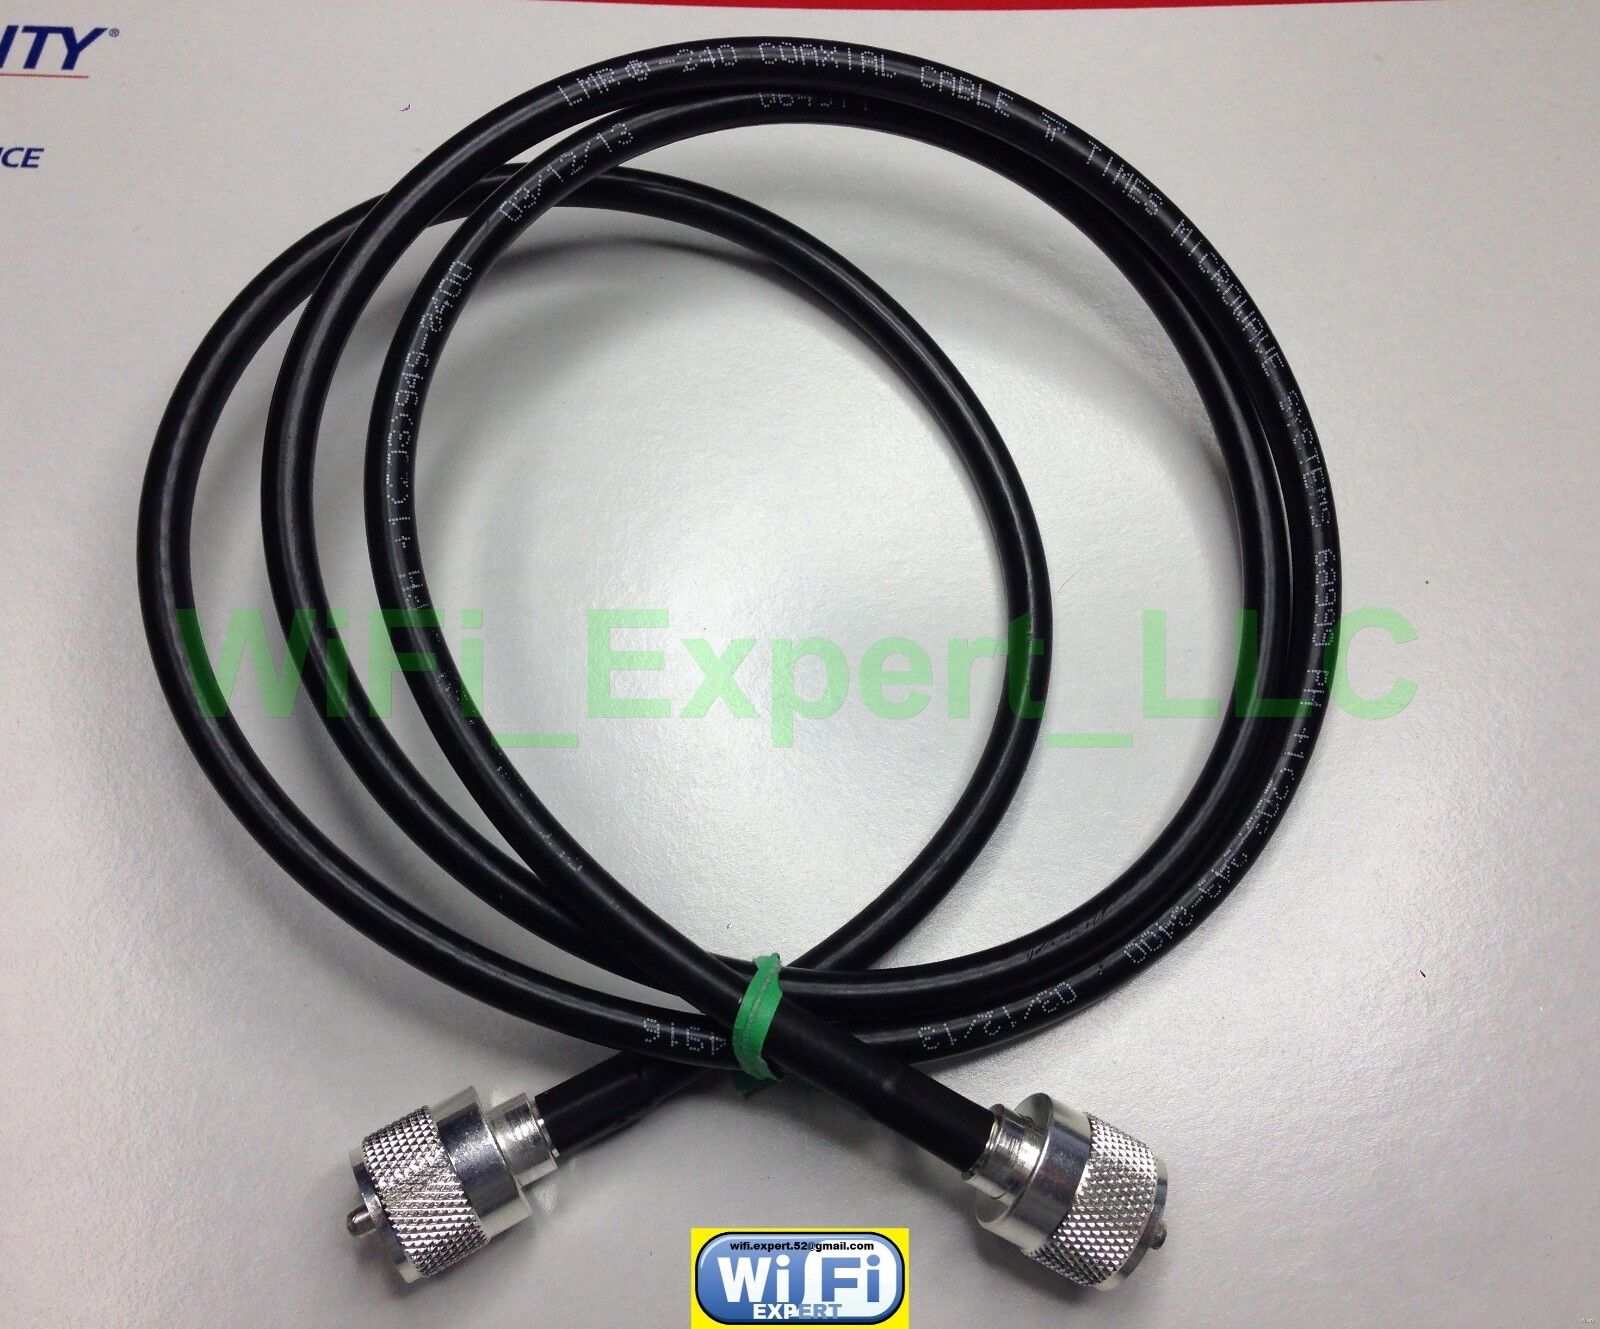 TIMES MICROWAVE ® 1-30 Feet LMR240 Antenna Jumper Coax Cable PL259 Connector USA